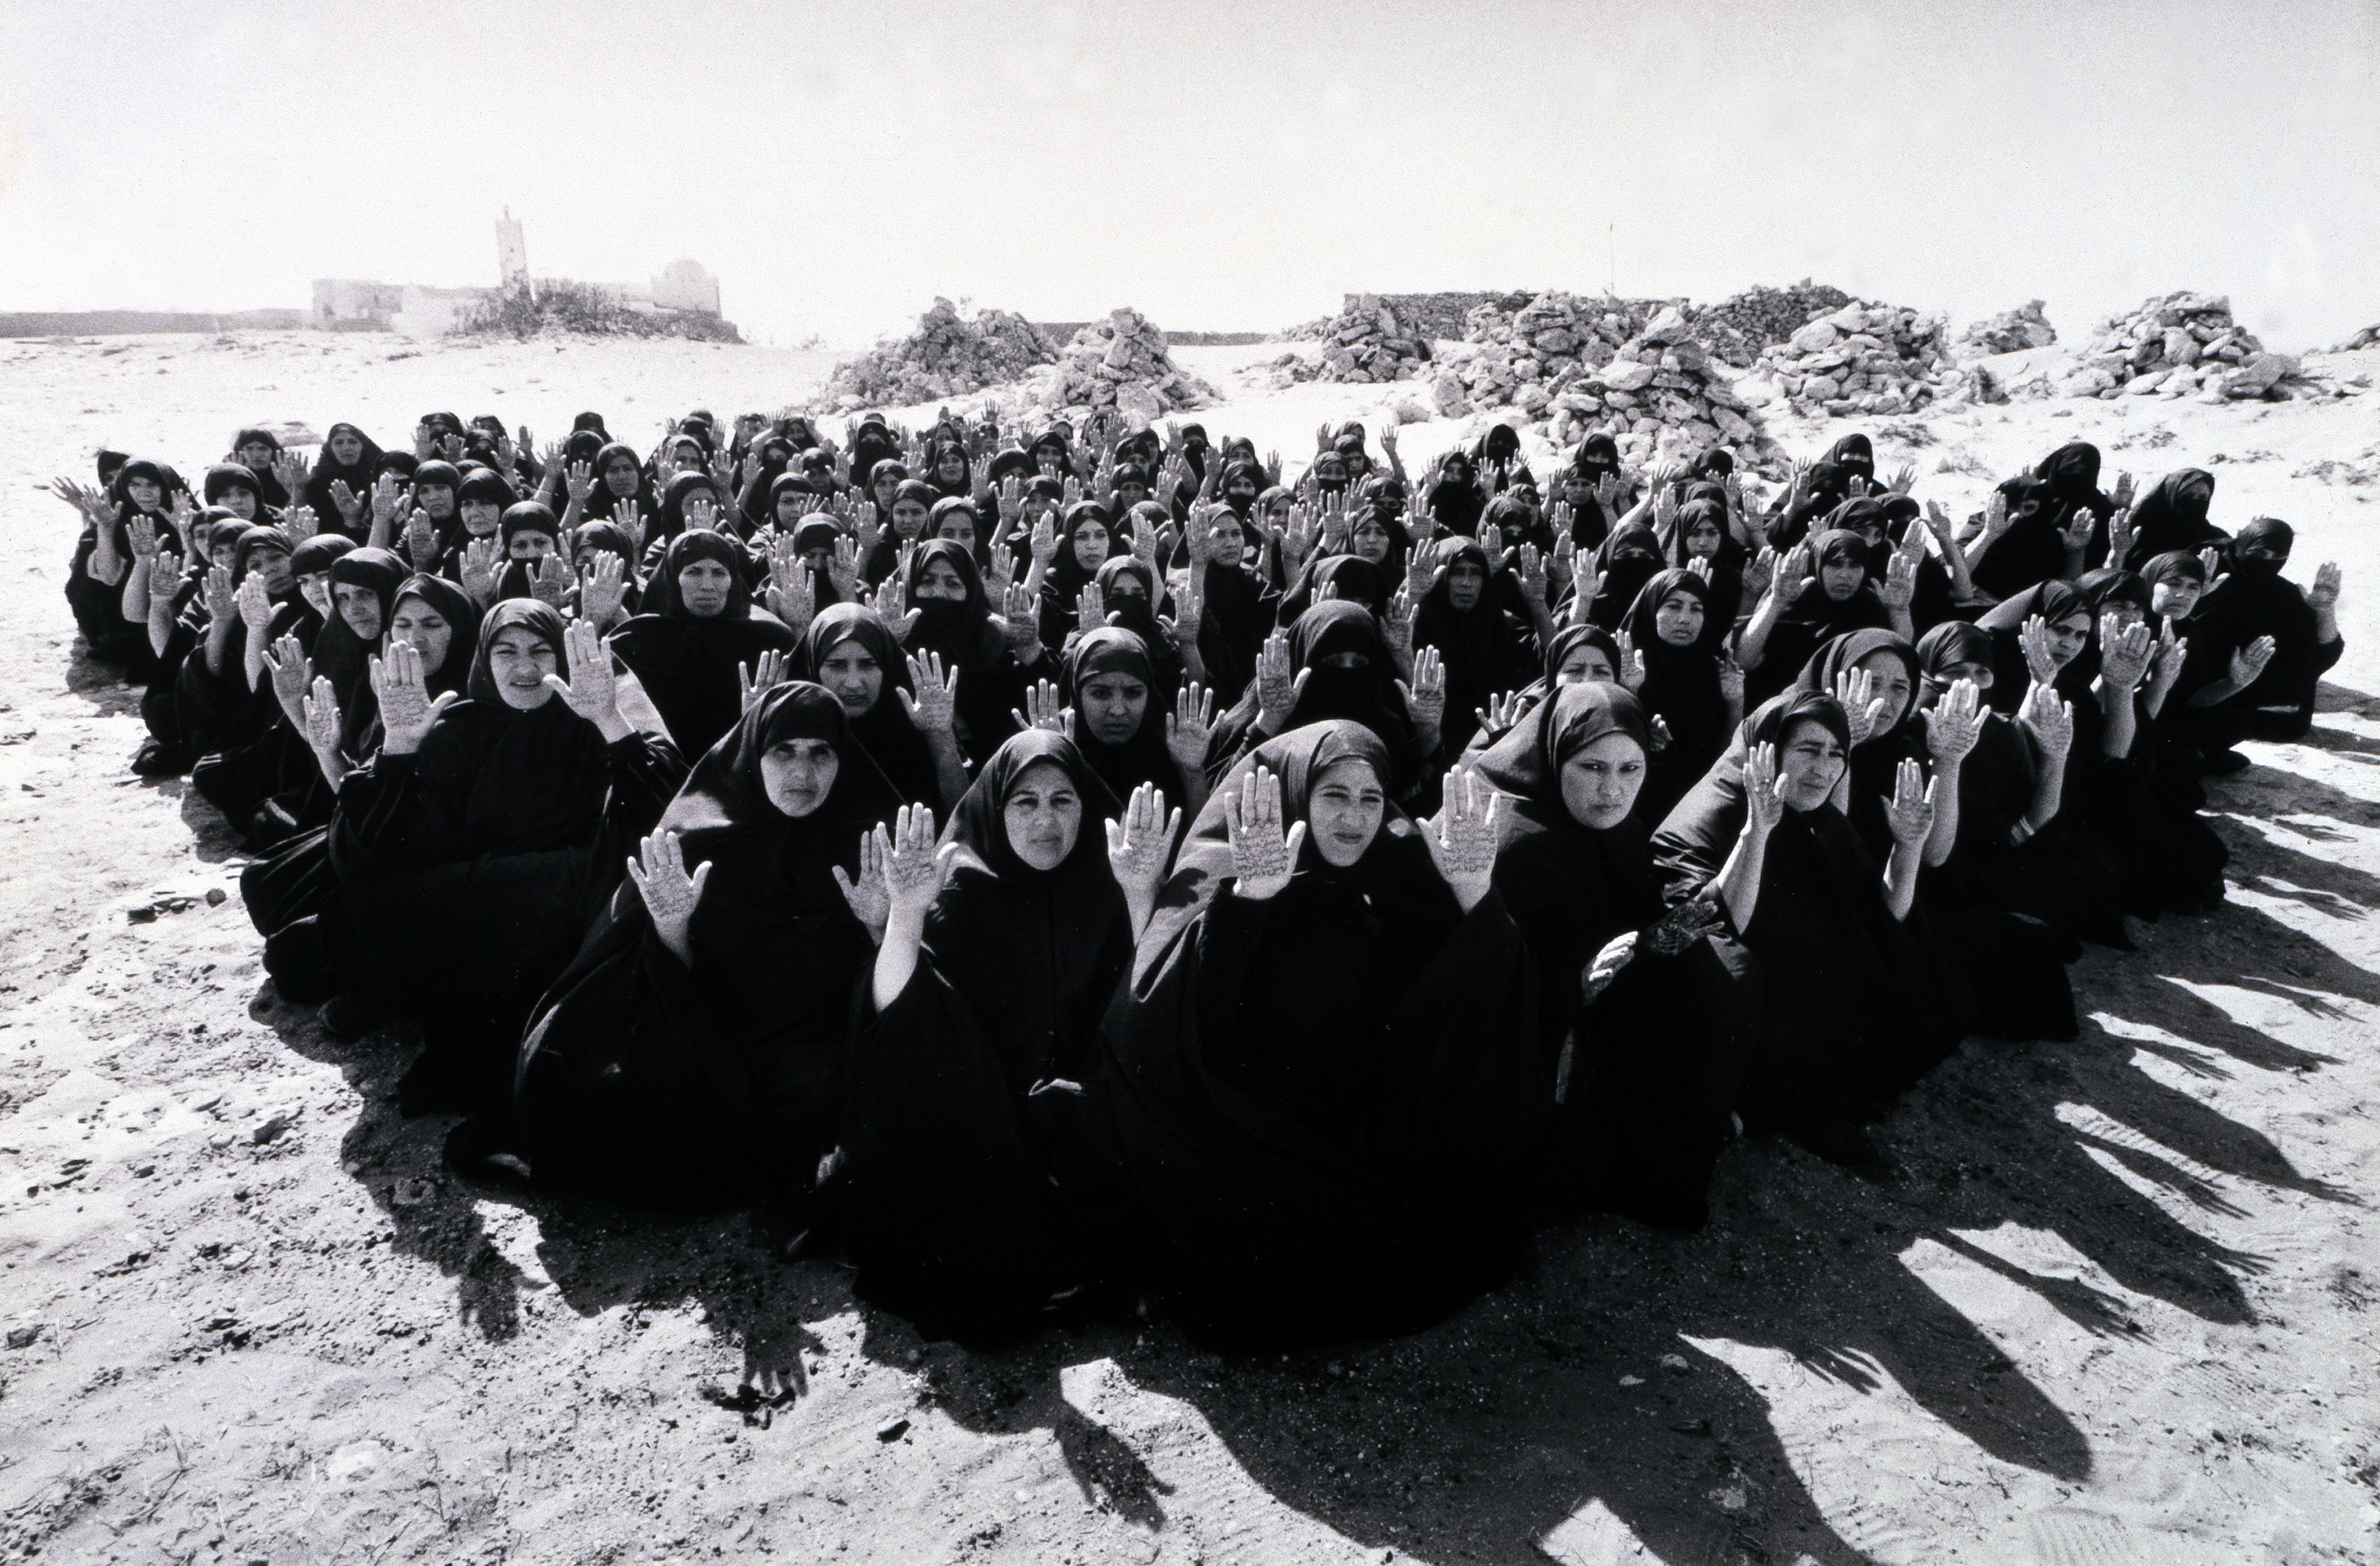 Shirin Neshat - Rapture, 1999, two-channel video/audio installation, 16mm film transferred to video